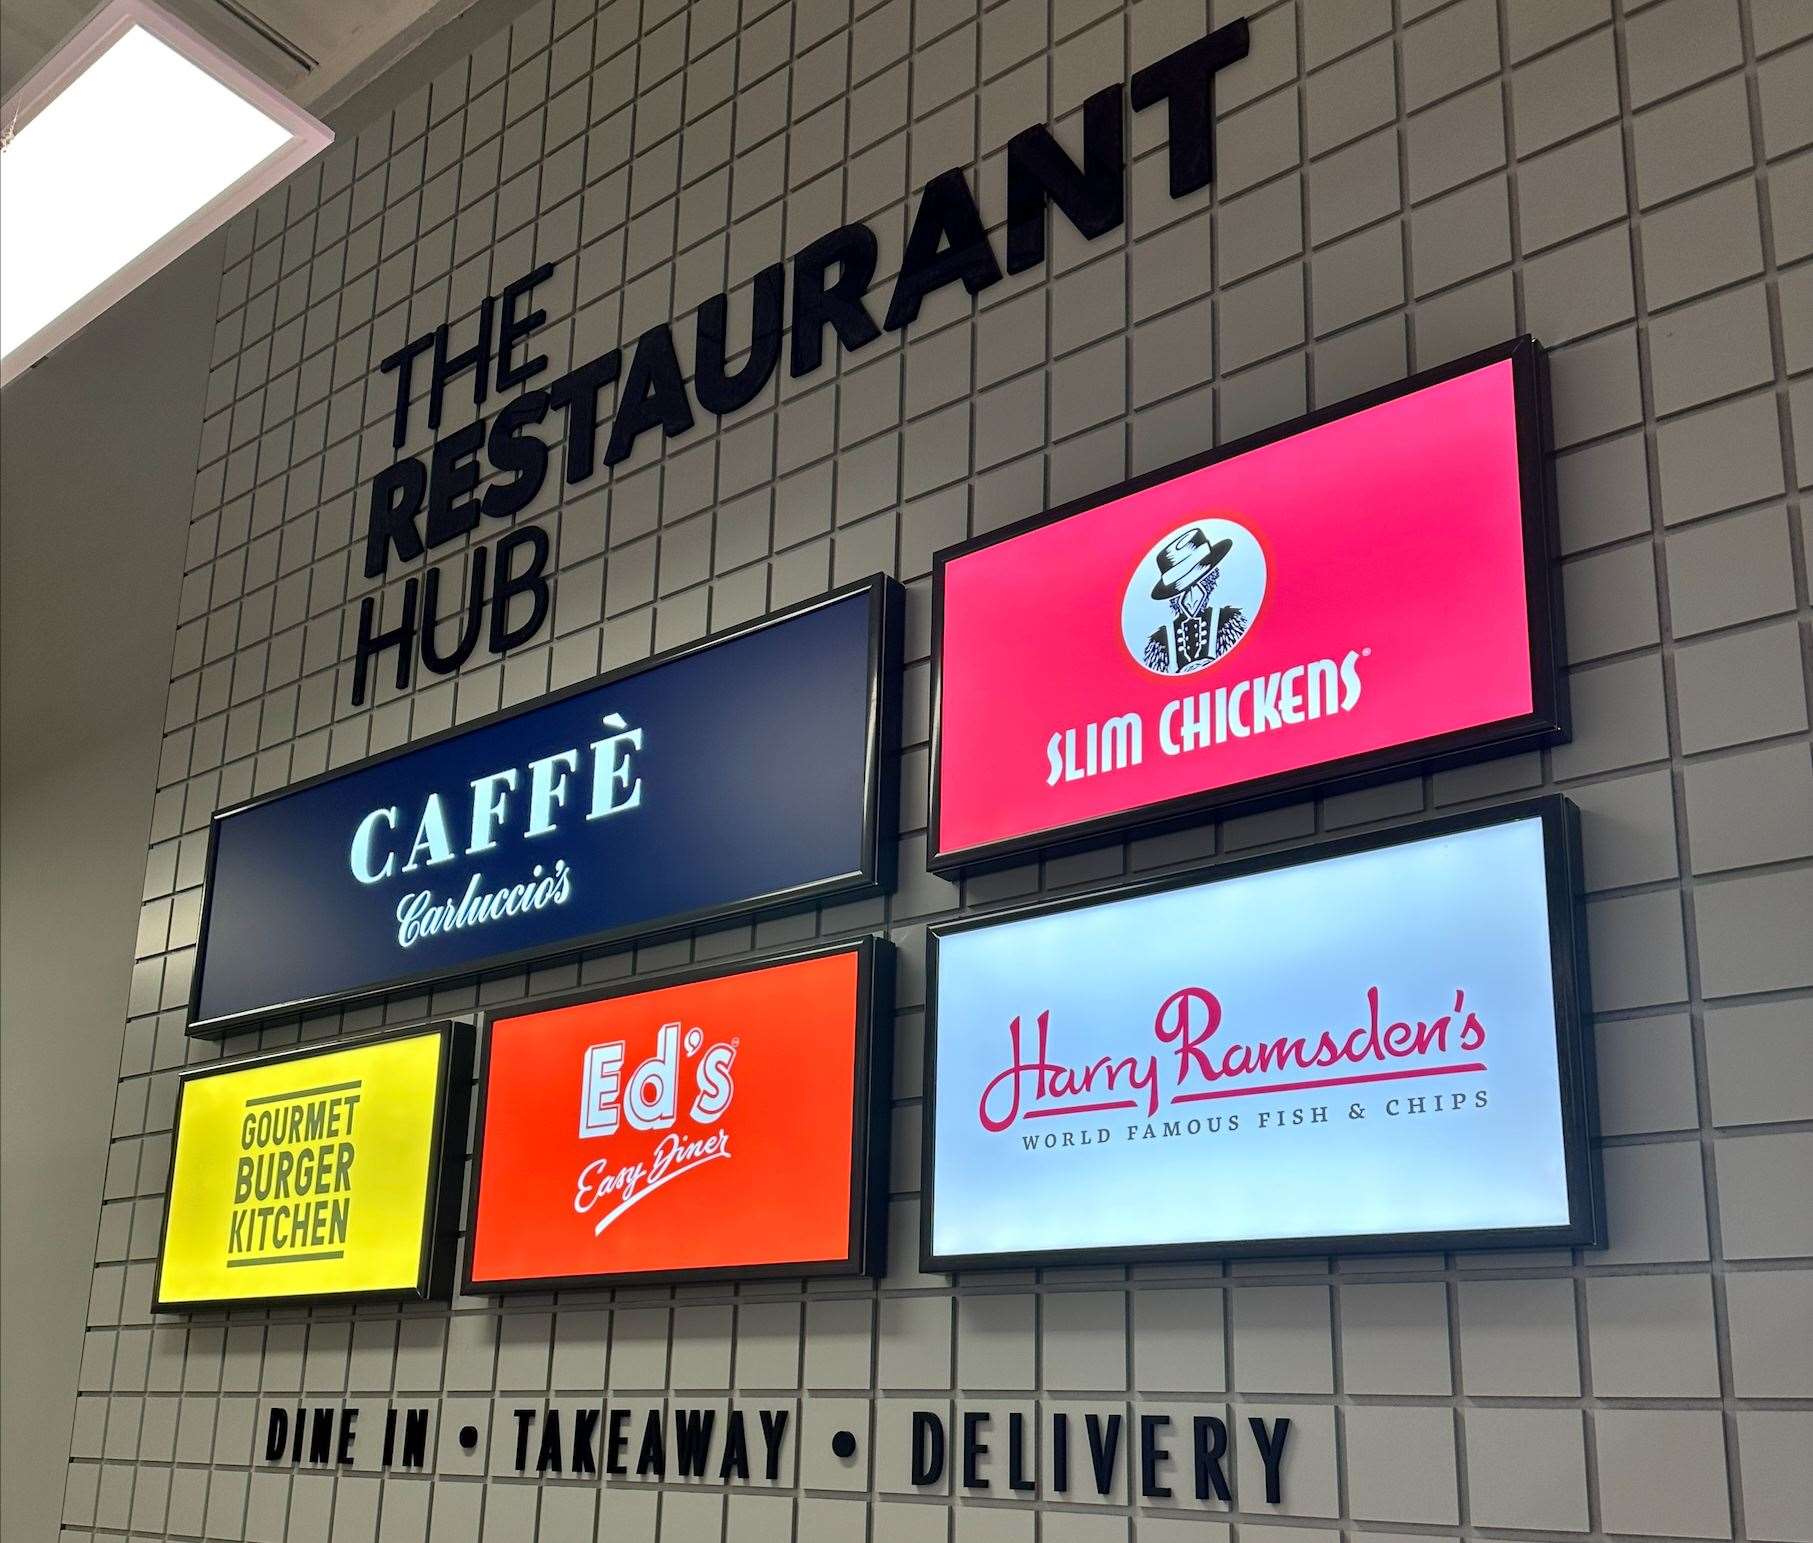 The Restaurant Hub carries five different chains